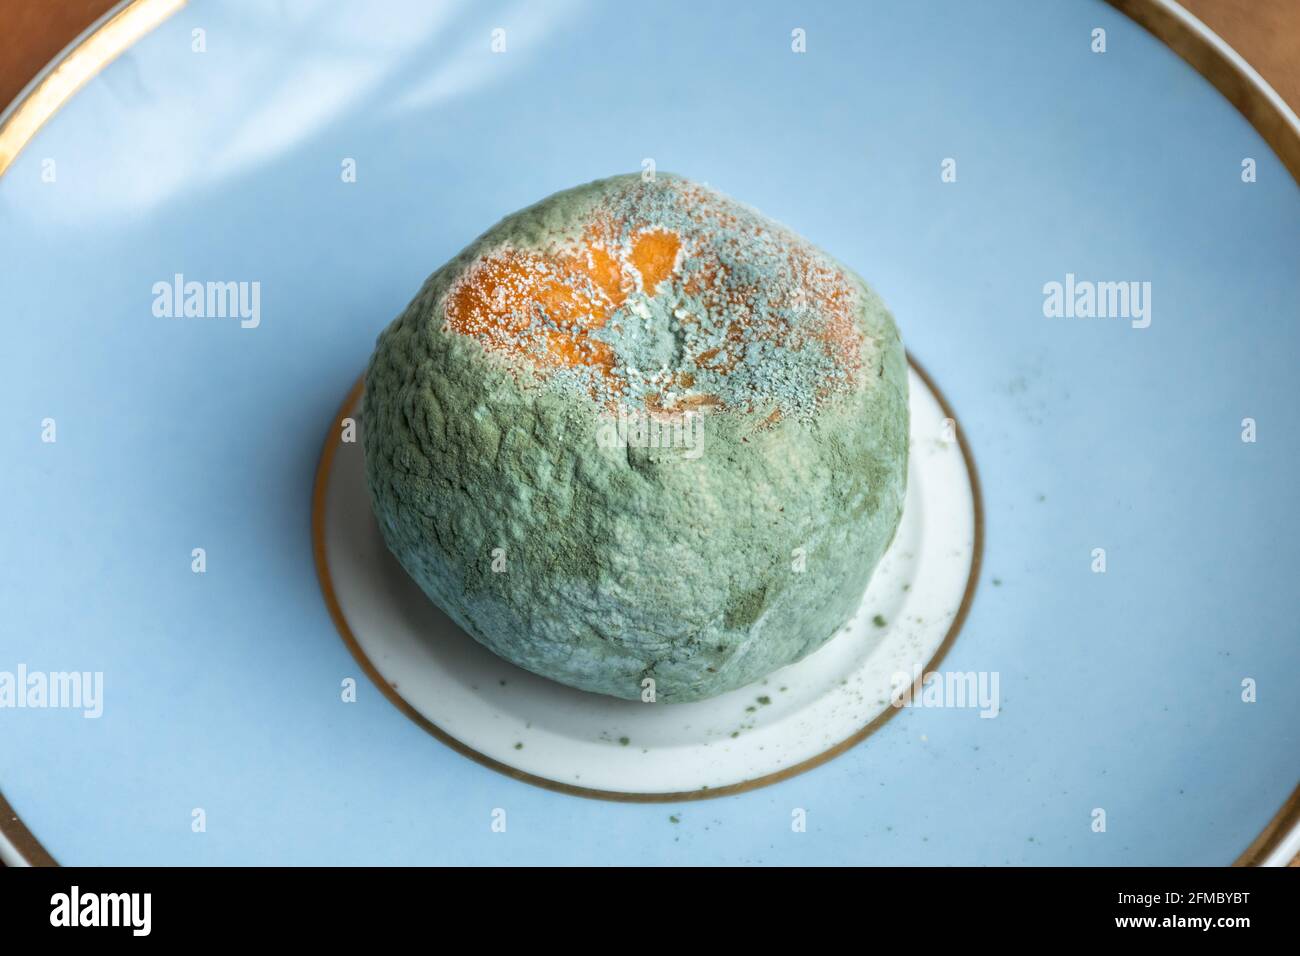 Mouldy satsuma or clementine, moldy fruit, on a saucer Stock Photo